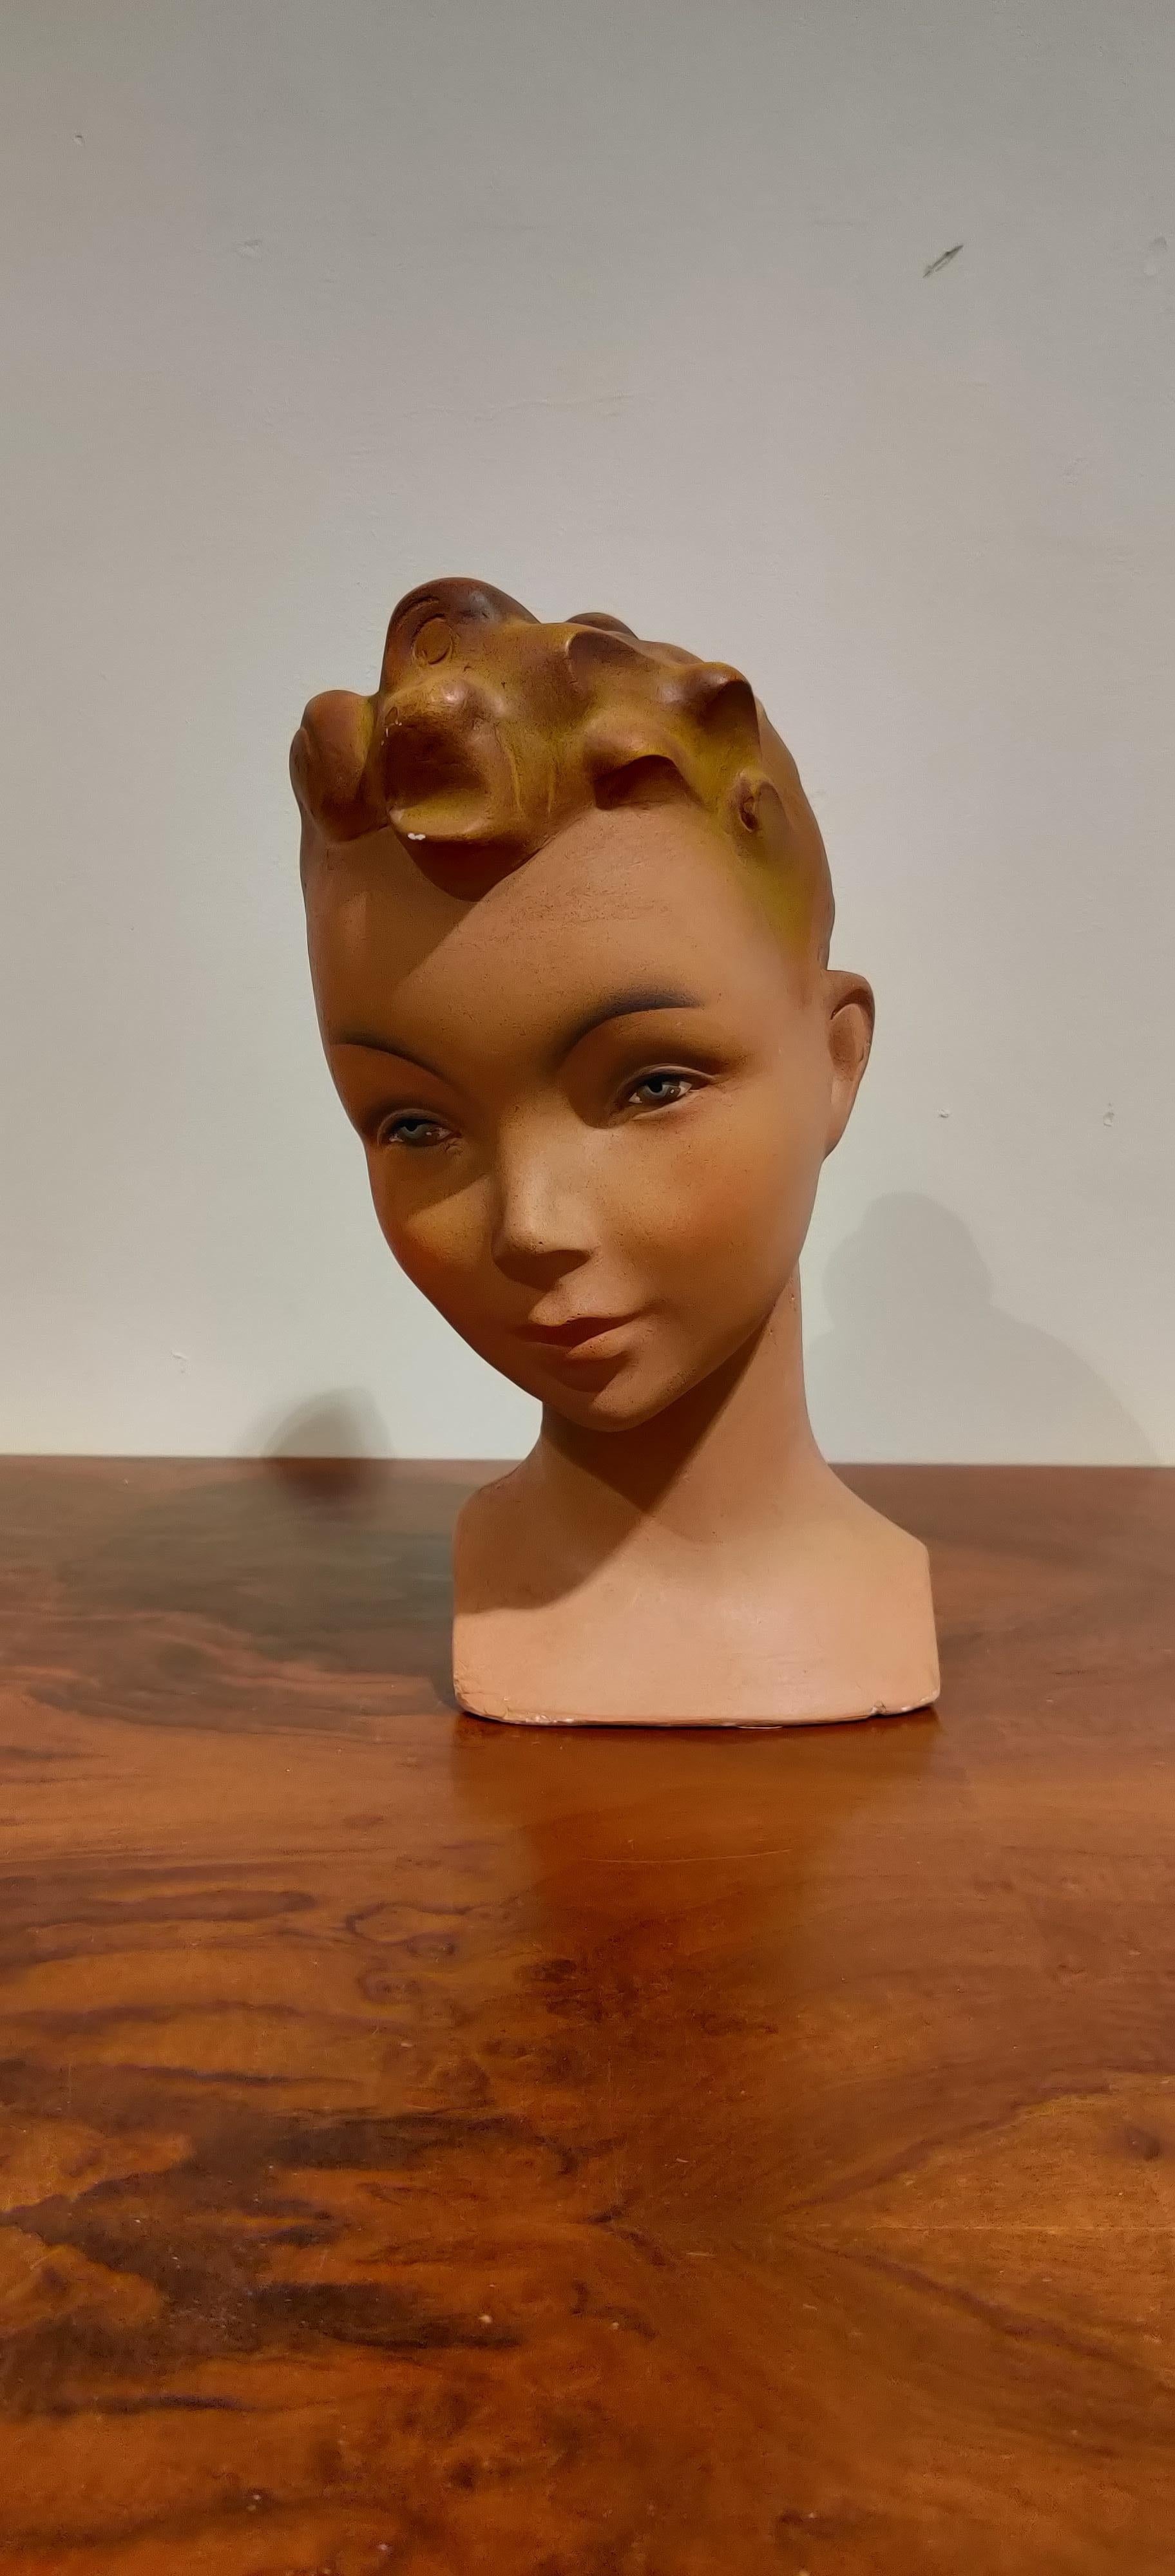 Beautiful female mannequin head made from plaster. 

It has some minor user traces.

Beautiful Art Deco hair style.

Comes from a lot acquired from a clothes shop that stopped activities.

Great decorative item to display glasses,